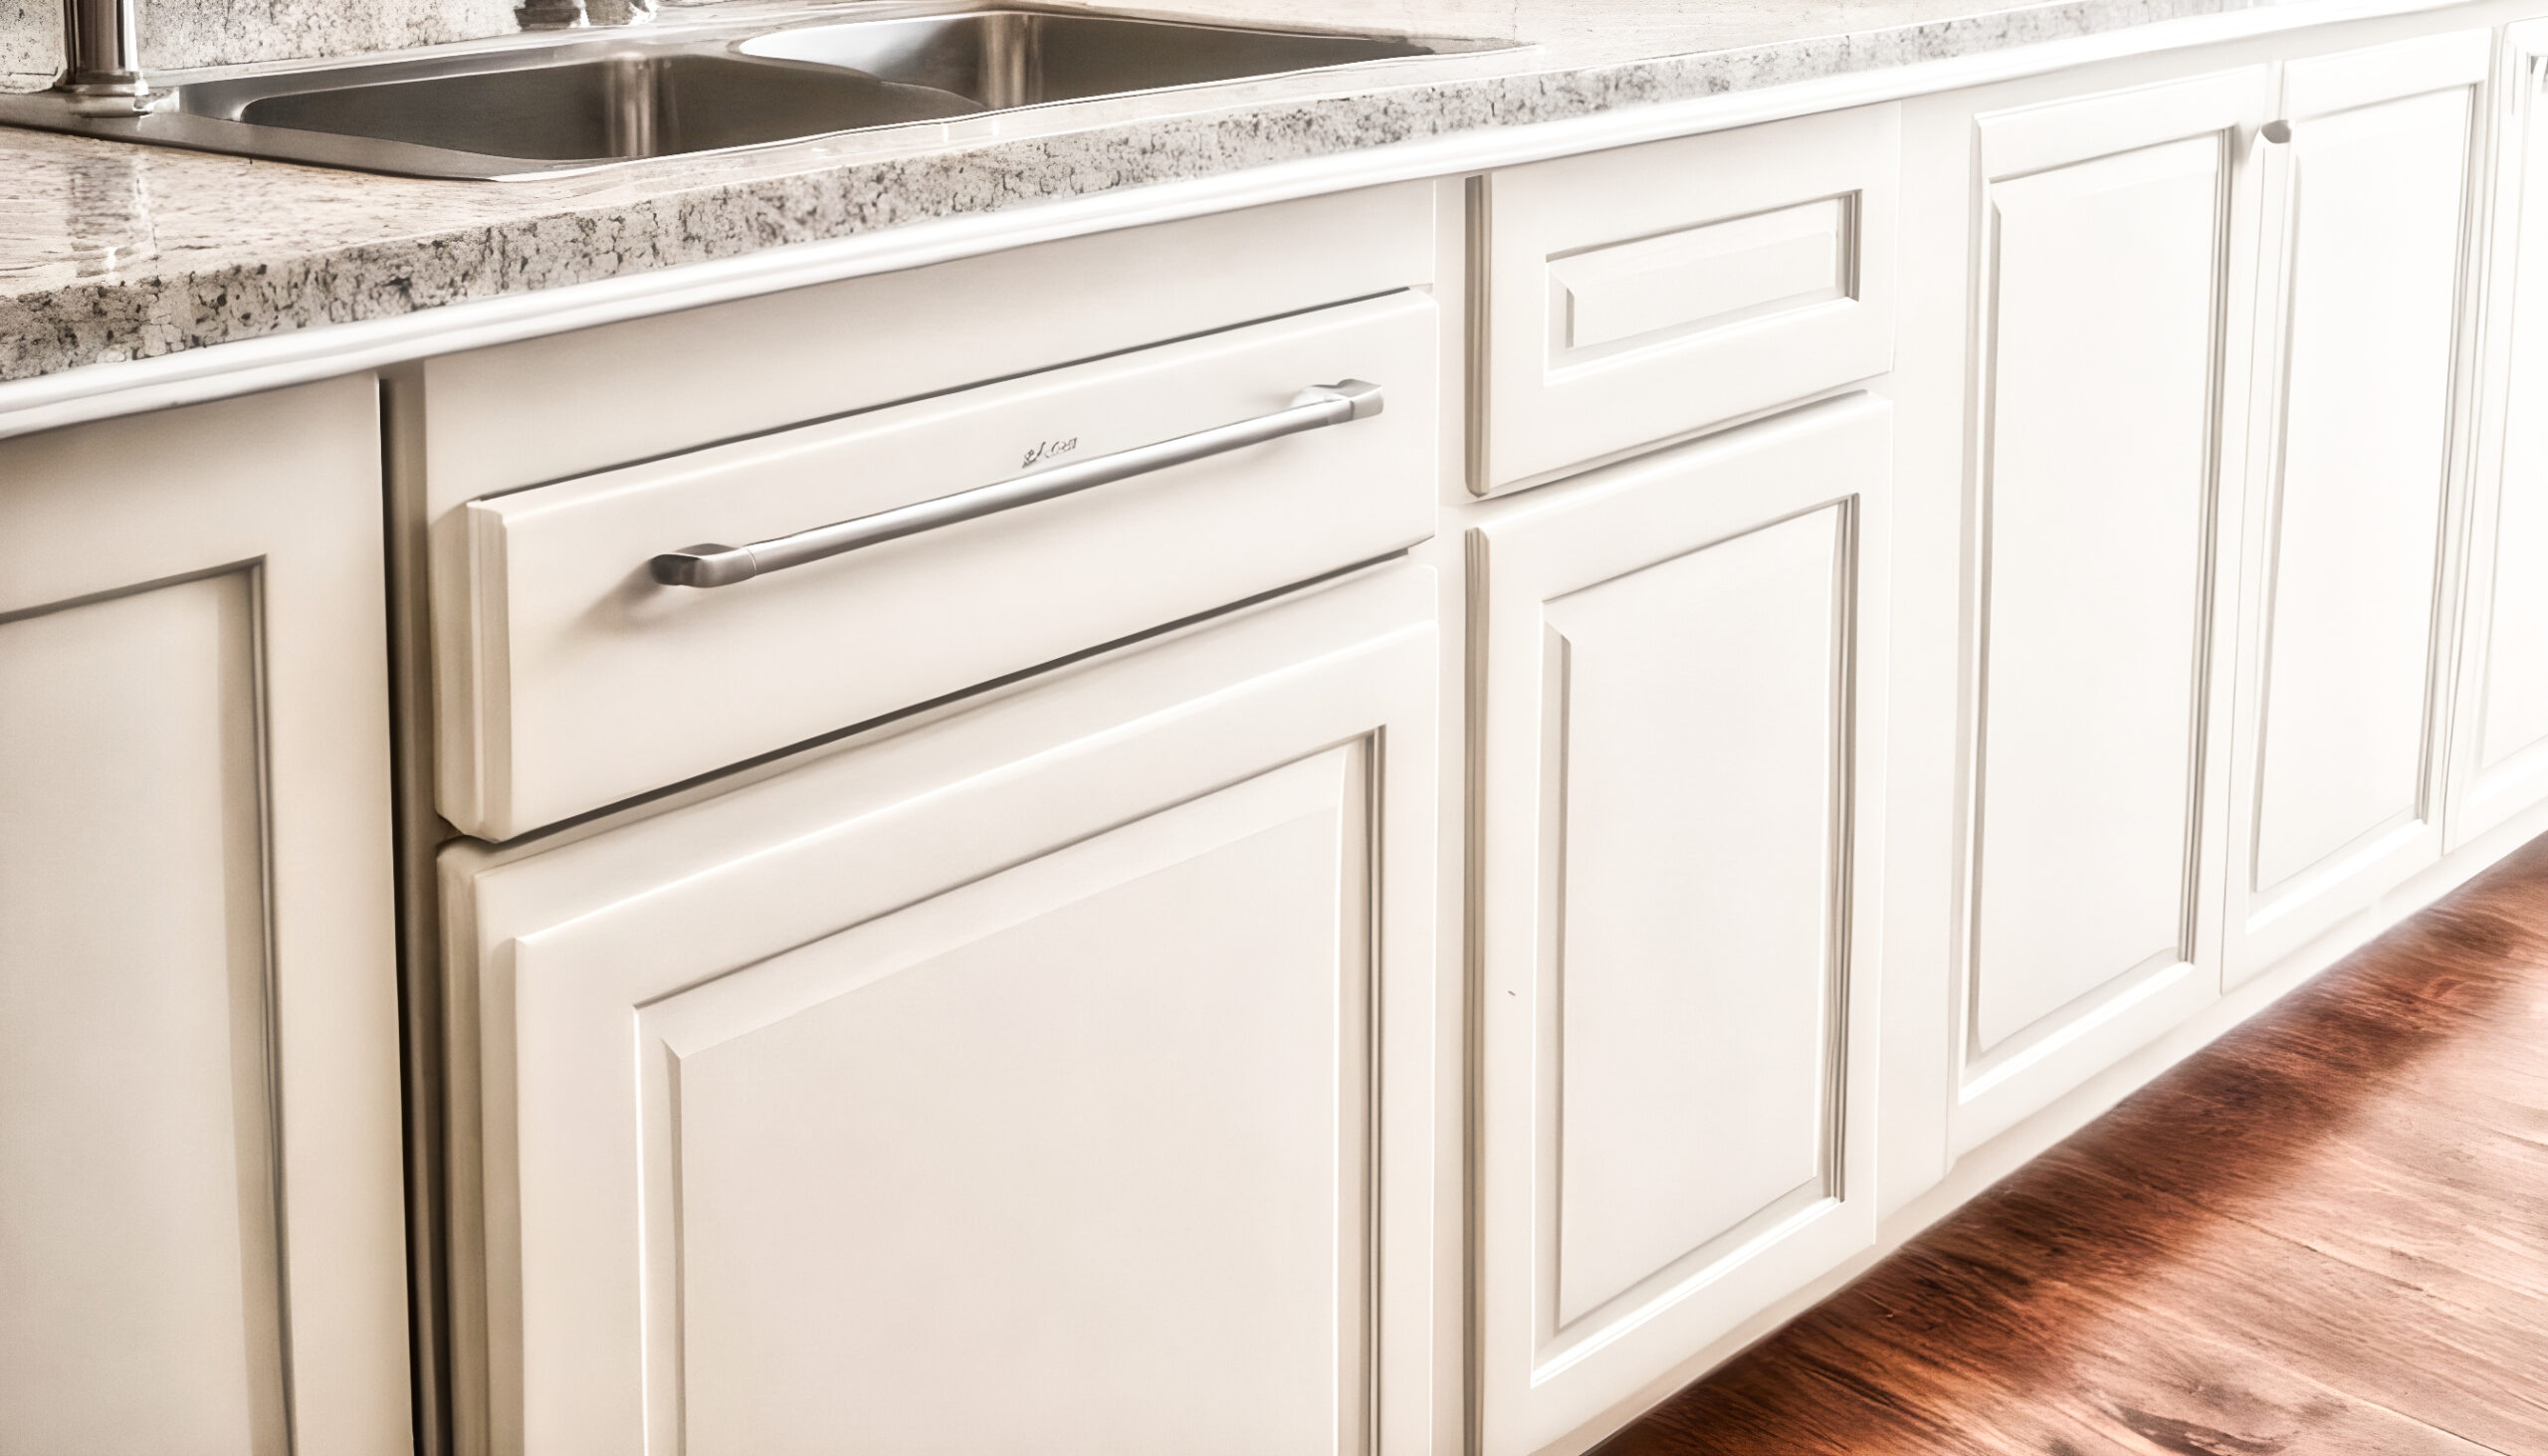 Lakeside Dishwasher Repair in Lakeway, TX: Trusted and Efficient Service